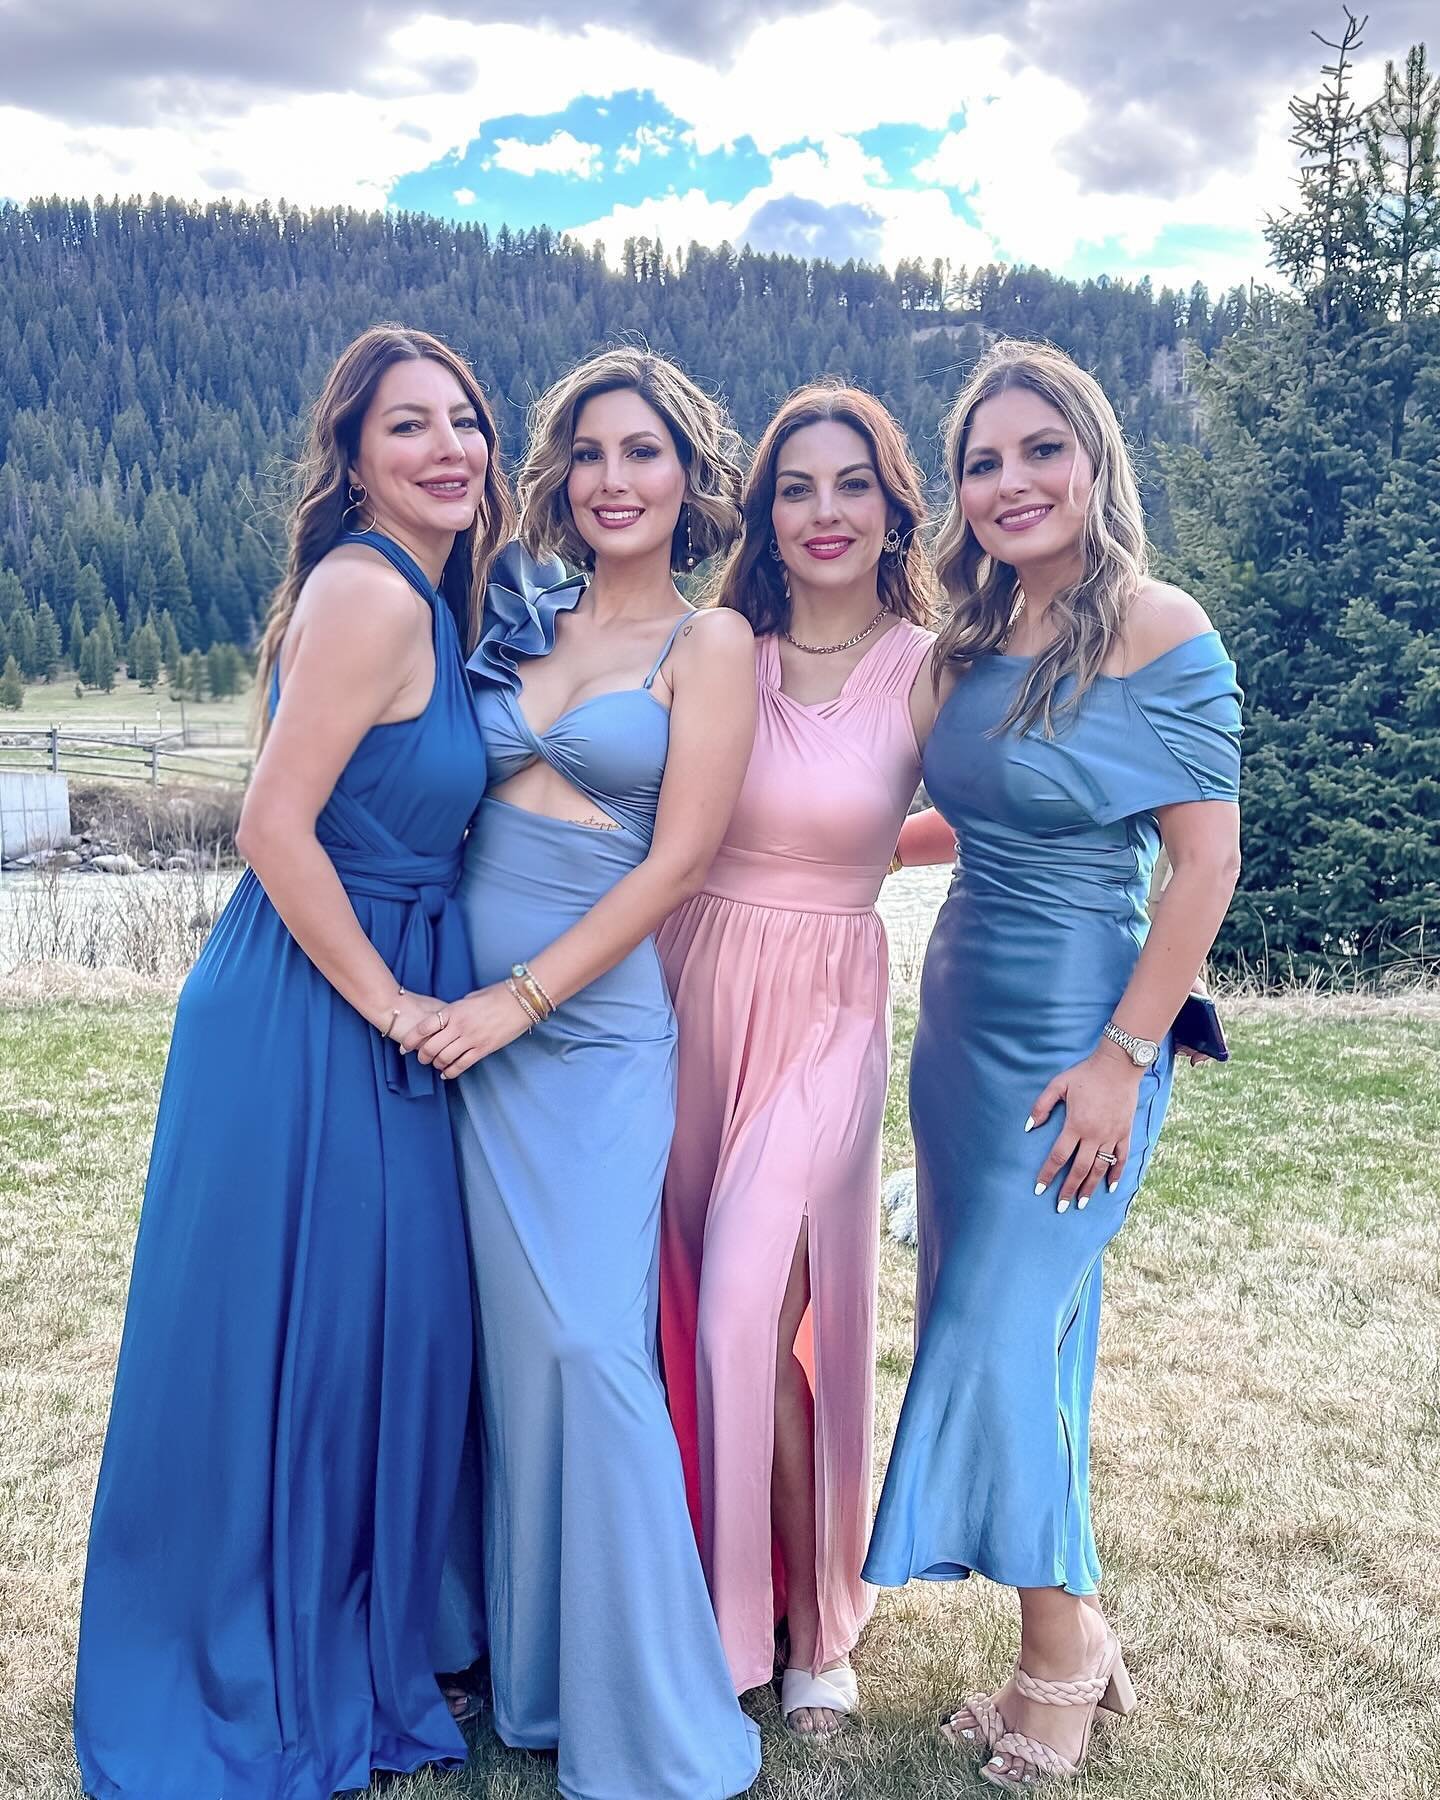 Spent a magical weekend in Montana for my brother&rsquo;s wedding 💍
The views were absolutely stunning 🏔️ and so was the bride 👰🏼🤍
Here are some snapshots from my phone &mdash; can&rsquo;t wait to share the professional ones!

#sisters #montana 